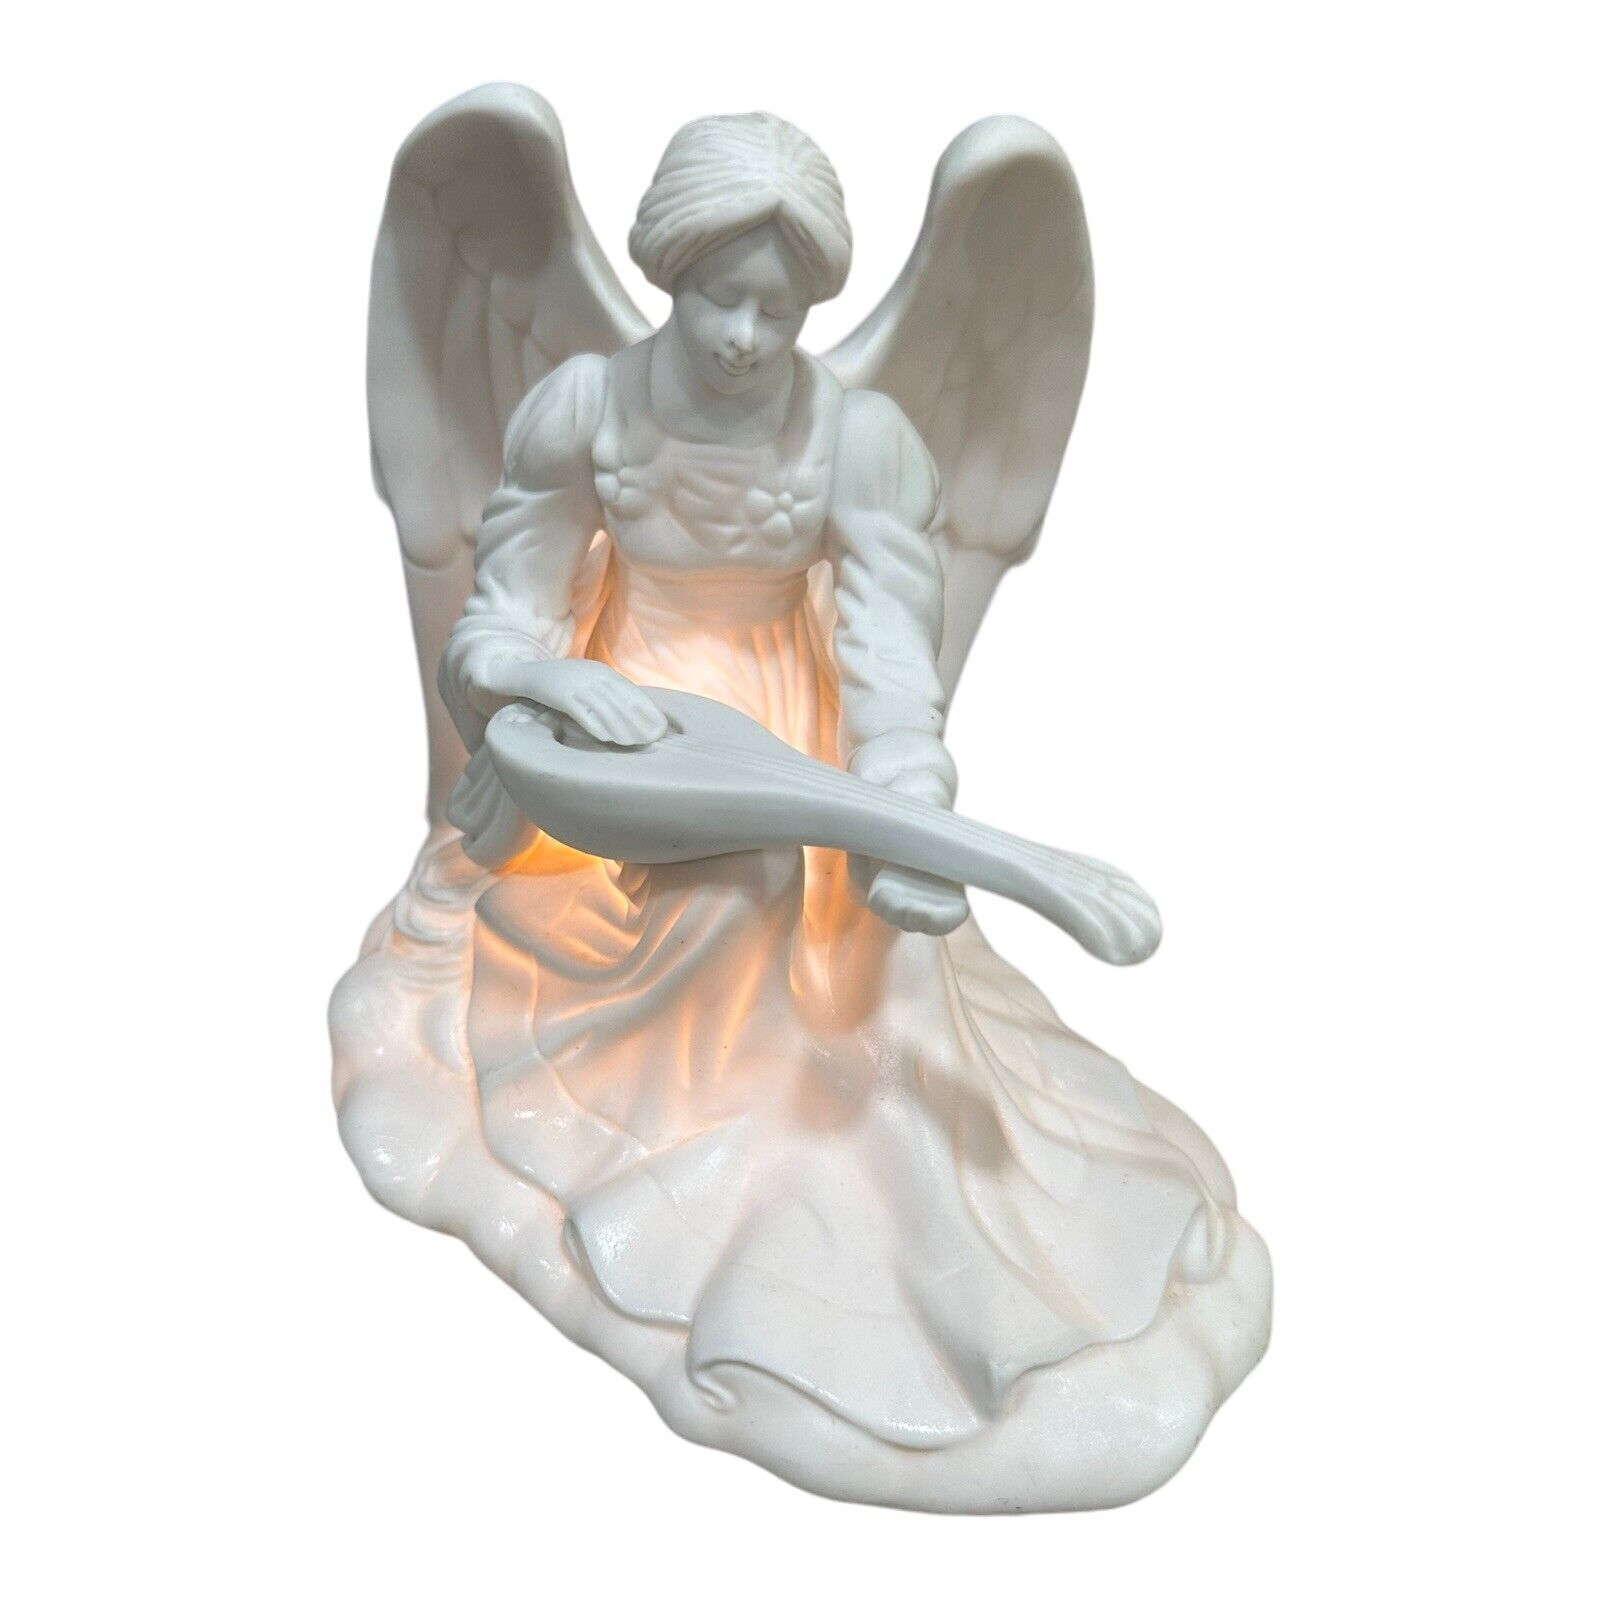 Avon 1997 Lighted Porcelain Angel with Lute Decorative Night Light